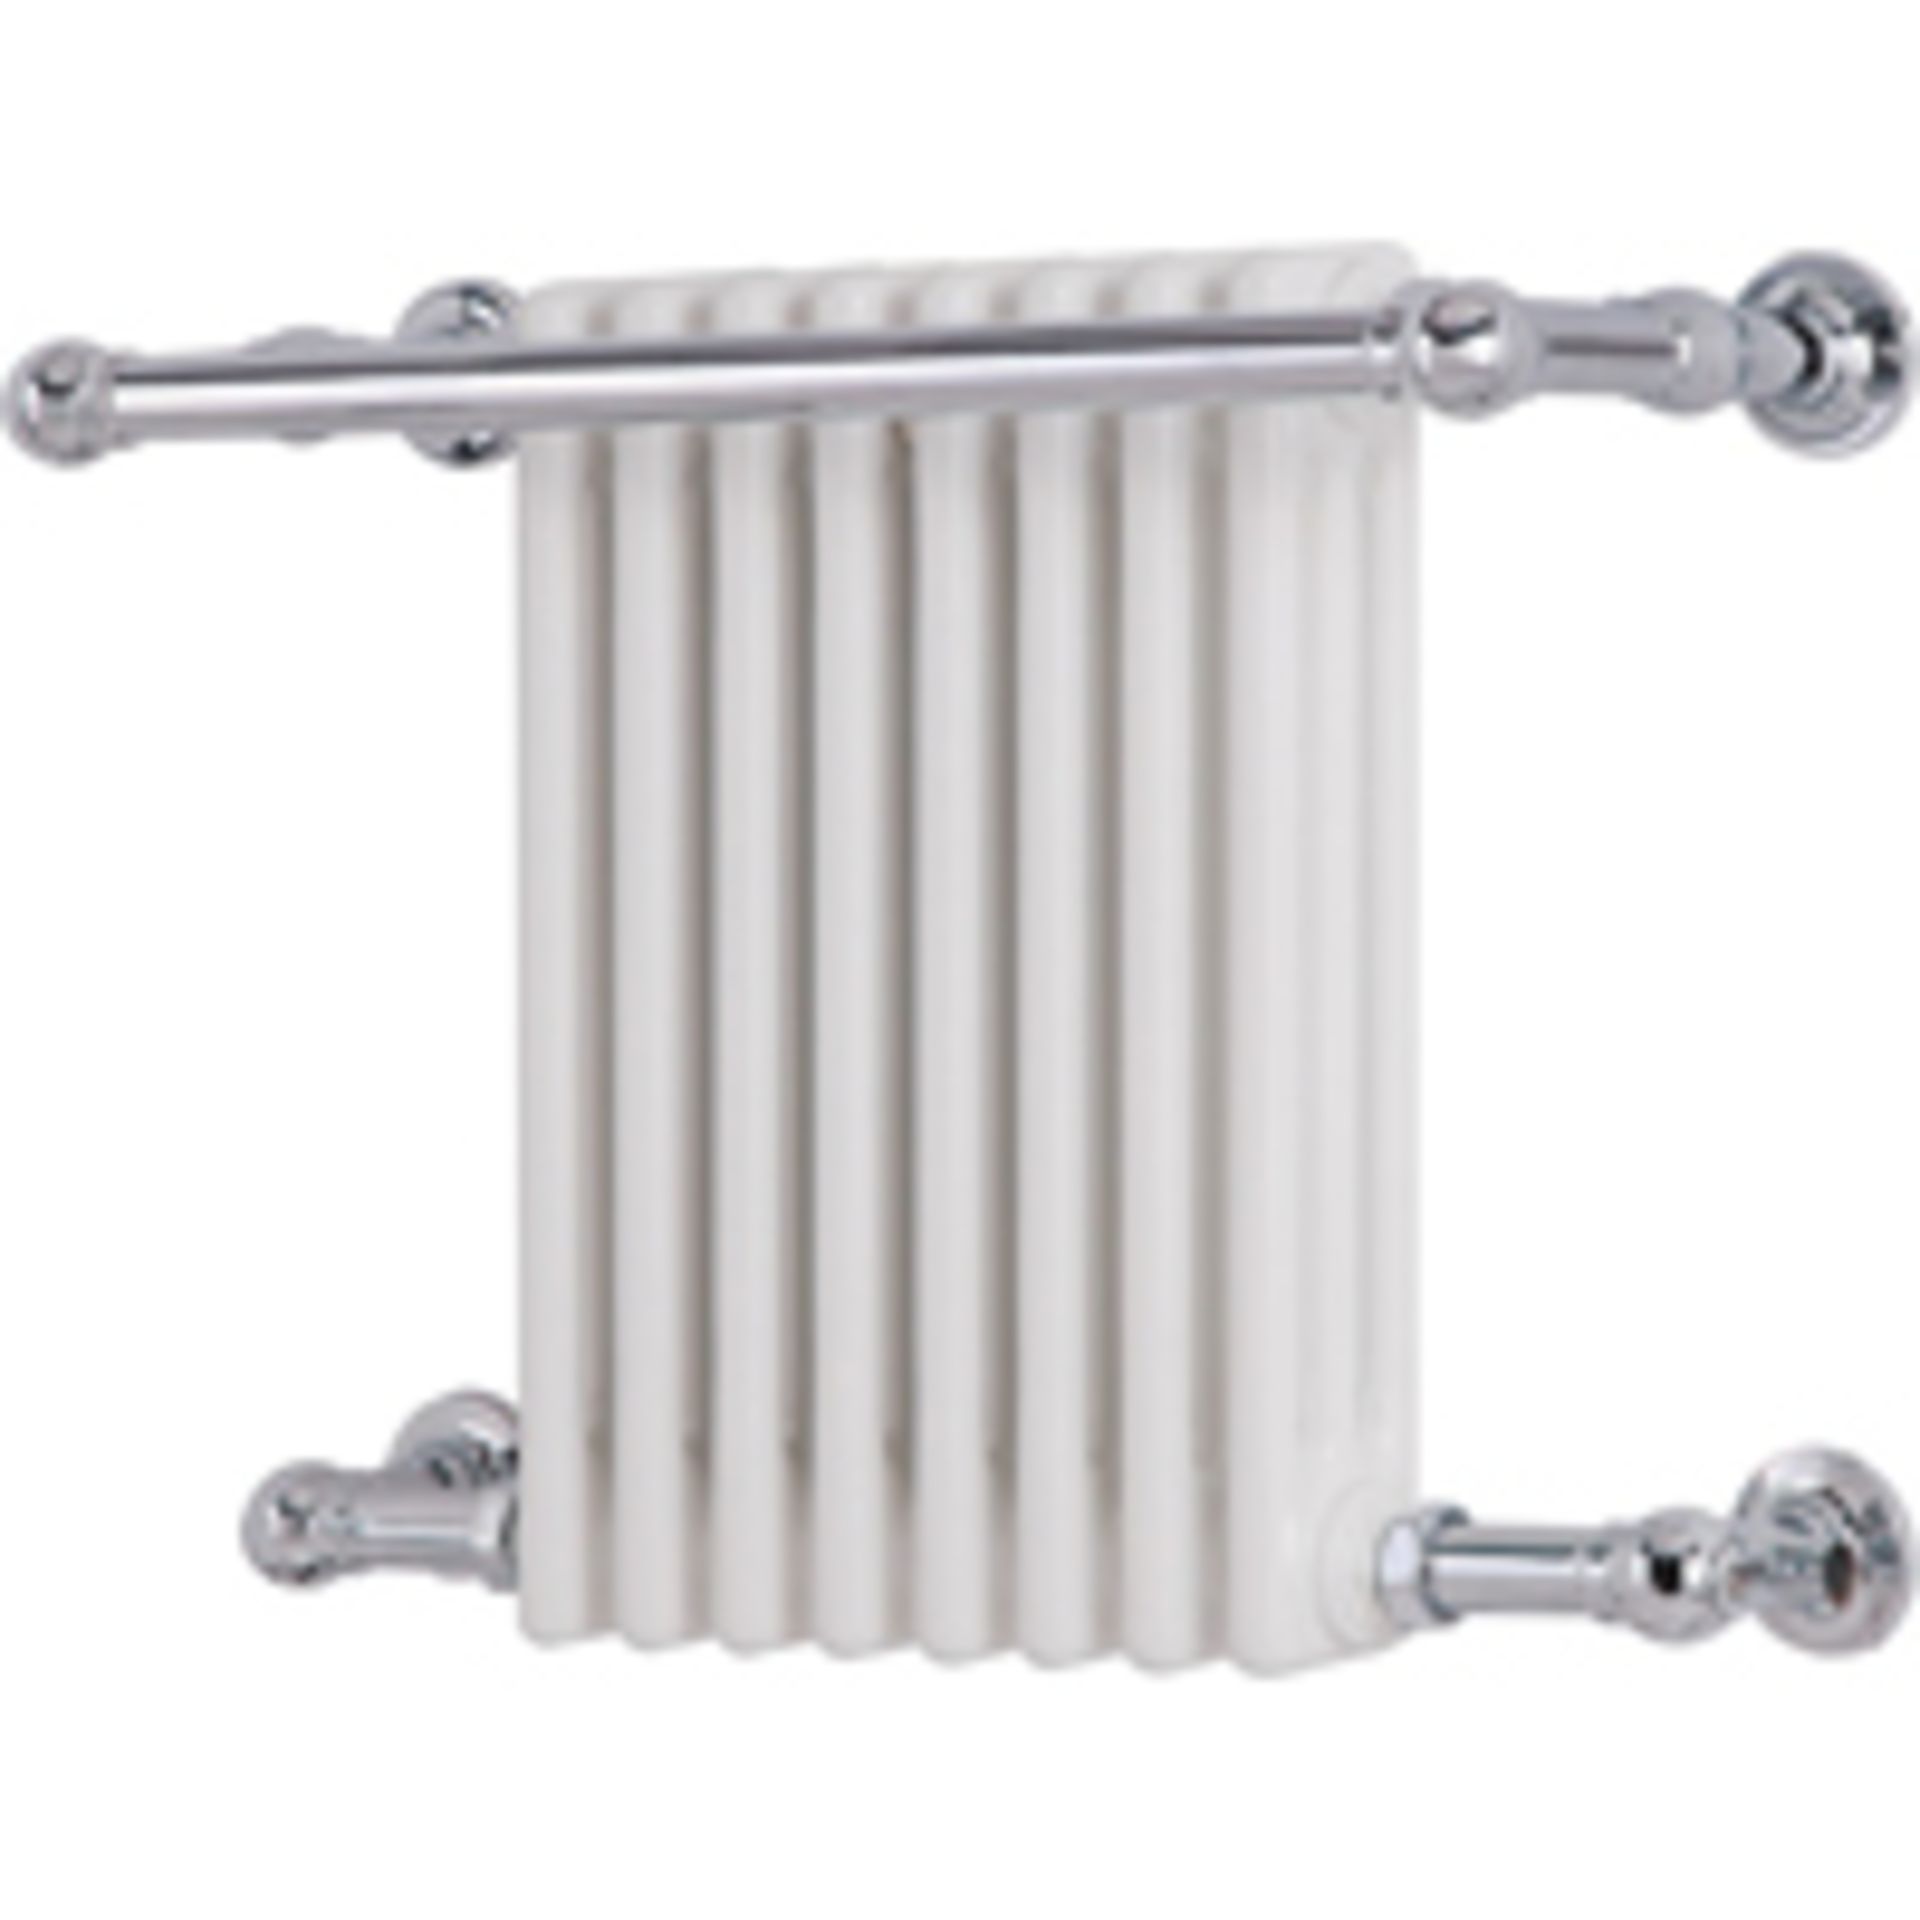 (A142) 508x770mm Reina Camden Traditional Radiator White. RRP £399.99. Traditional and - Image 3 of 3